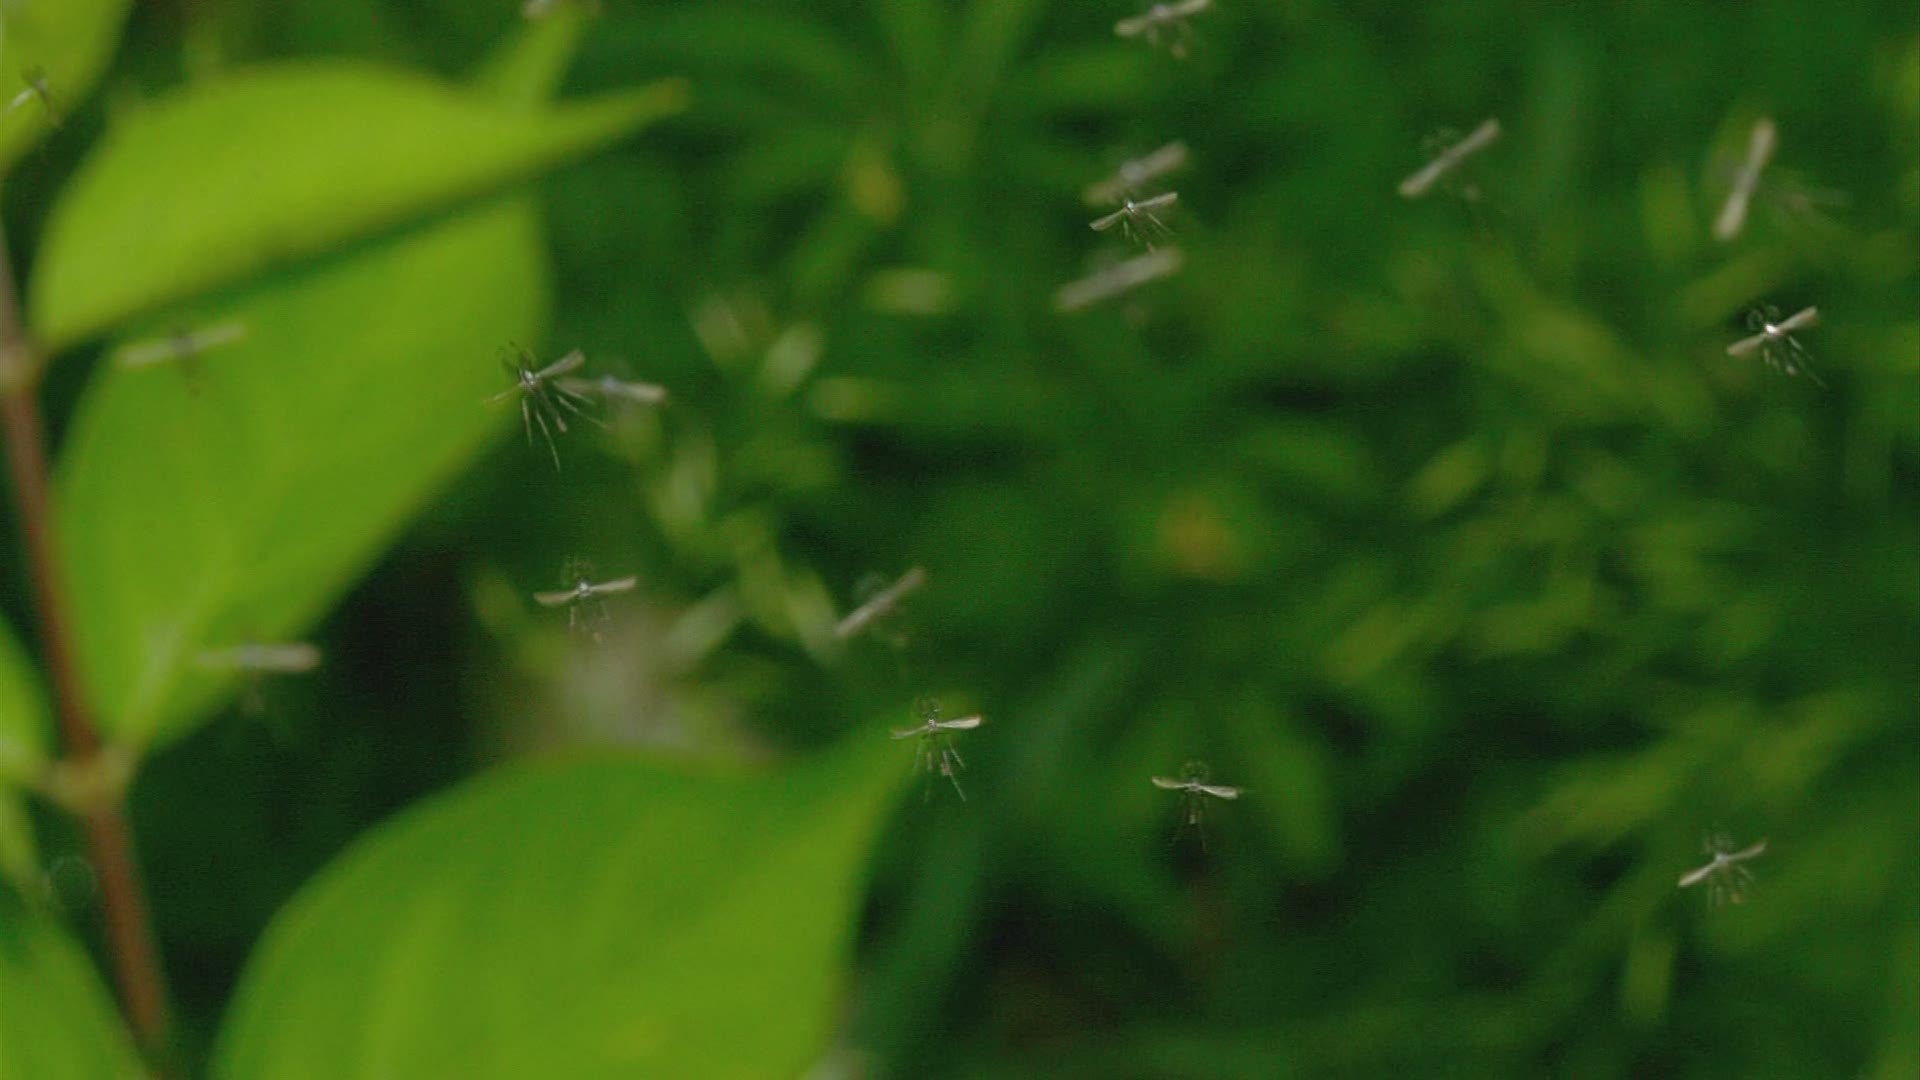 Swarms of midges appearing across central Ohio